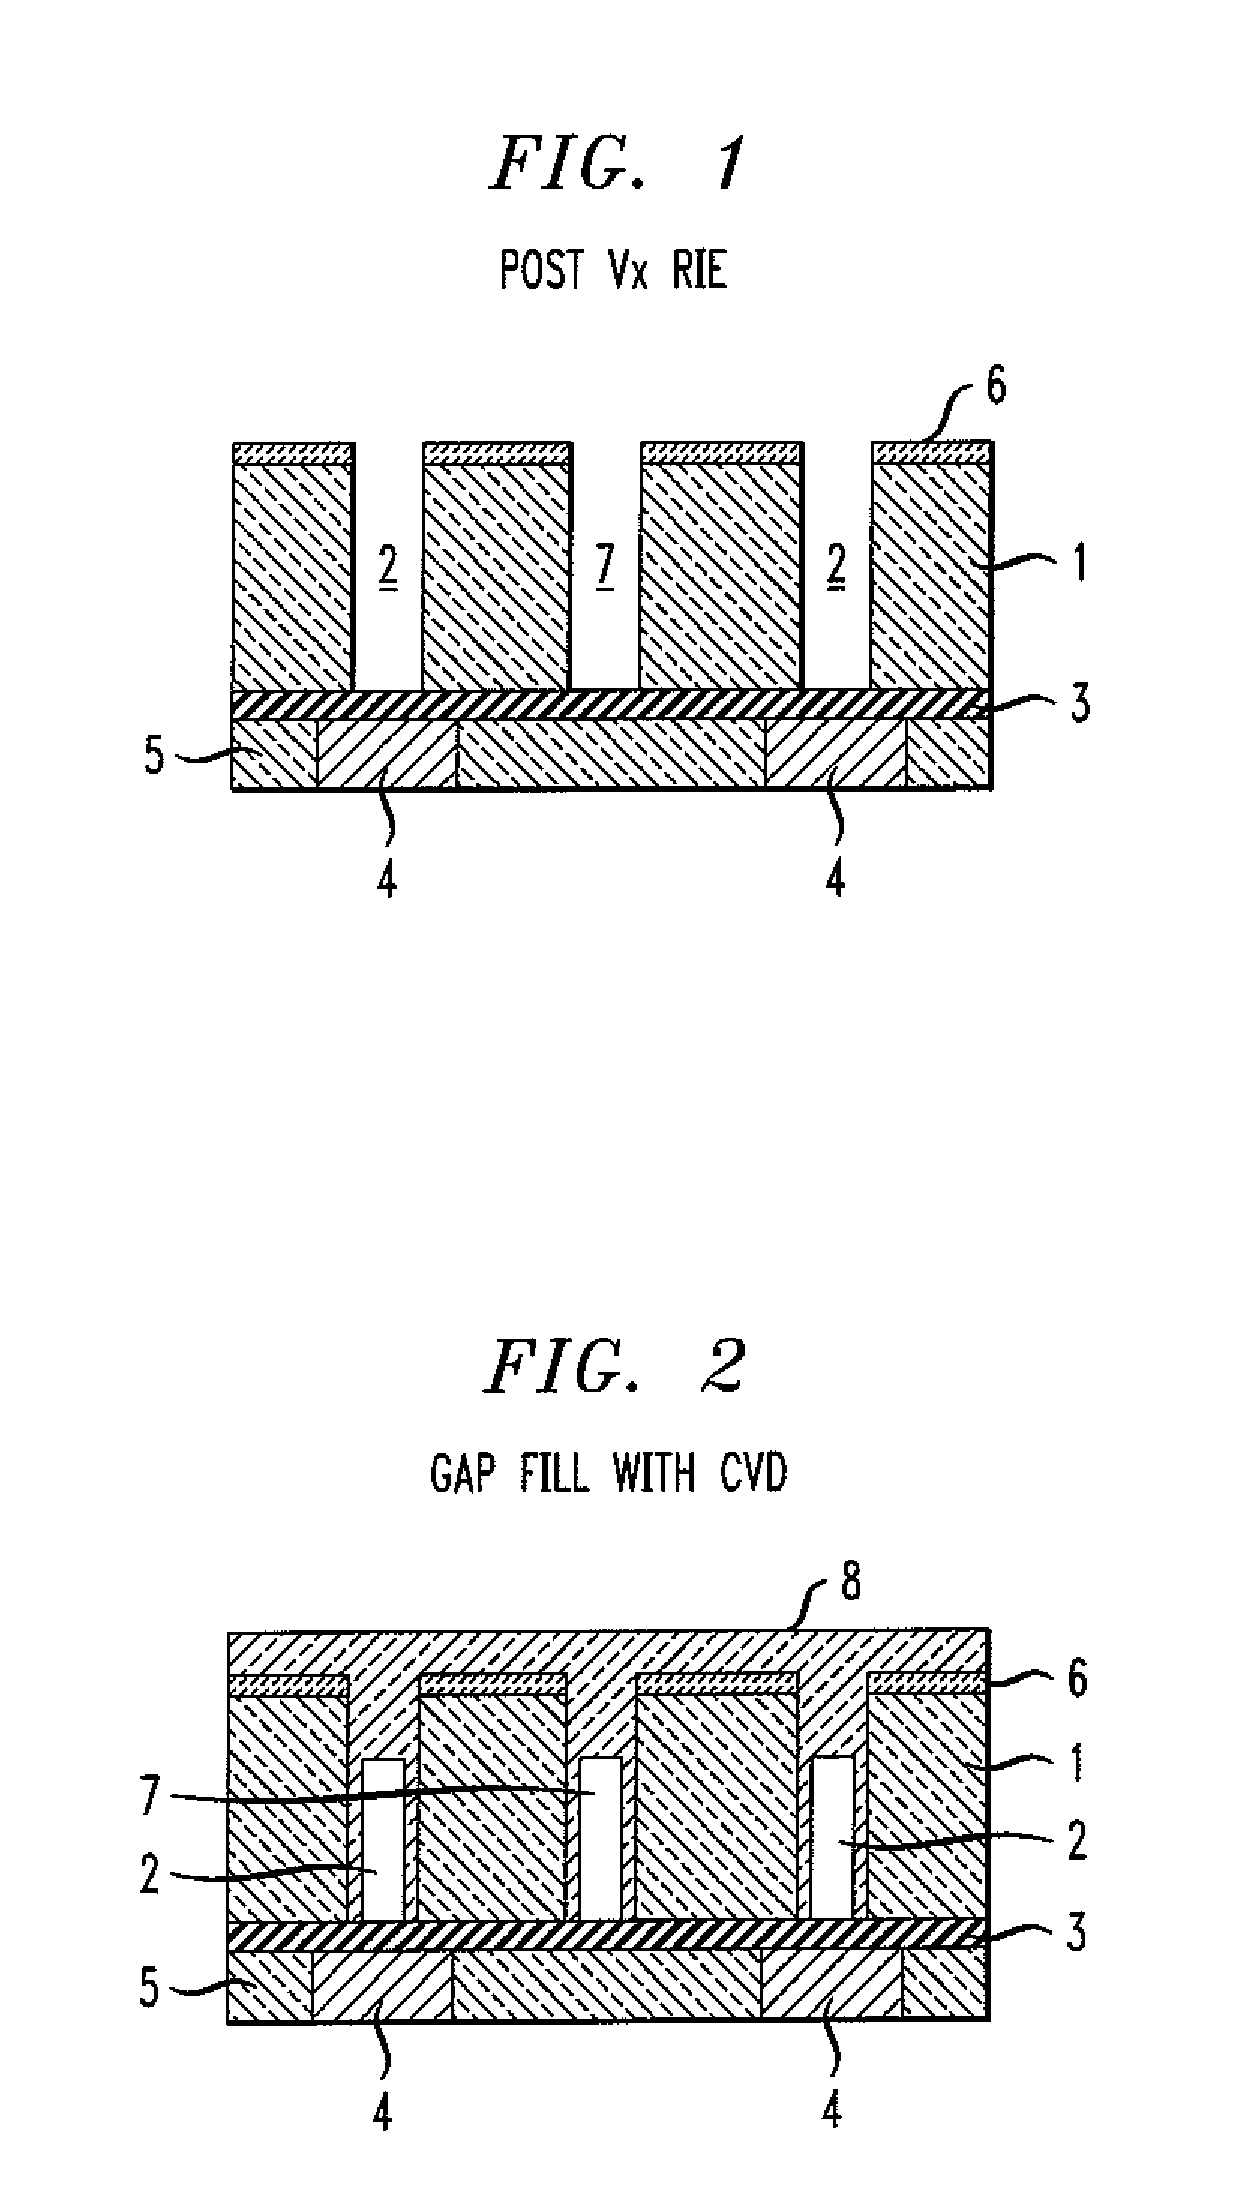 Circuit Structure with Low Dielectric Constant Regions and Method of Forming Same